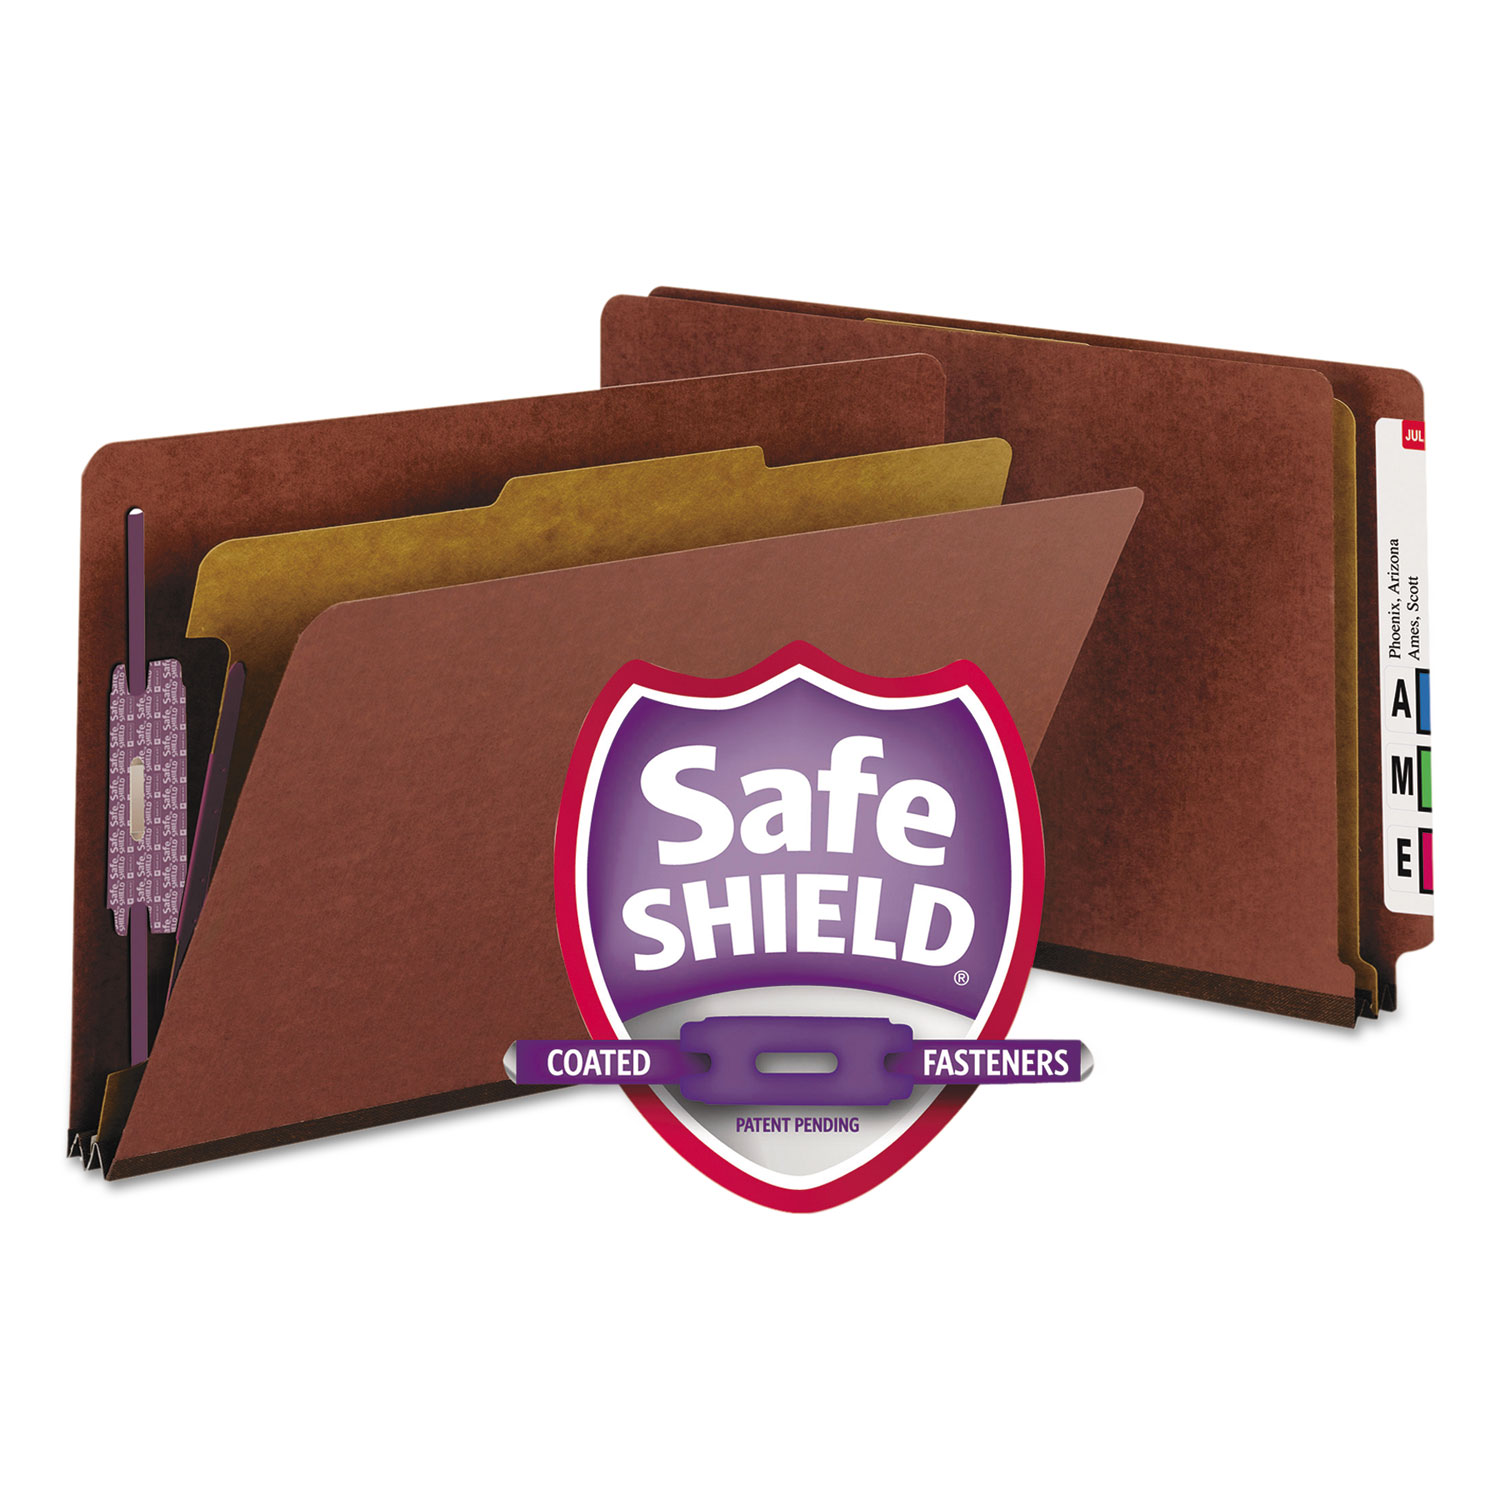  Smead 29855 End Tab Pressboard Classification Folders with SafeSHIELD Coated Fasteners, 1 Divider, Legal Size, Red, 10/Box (SMD29855) 